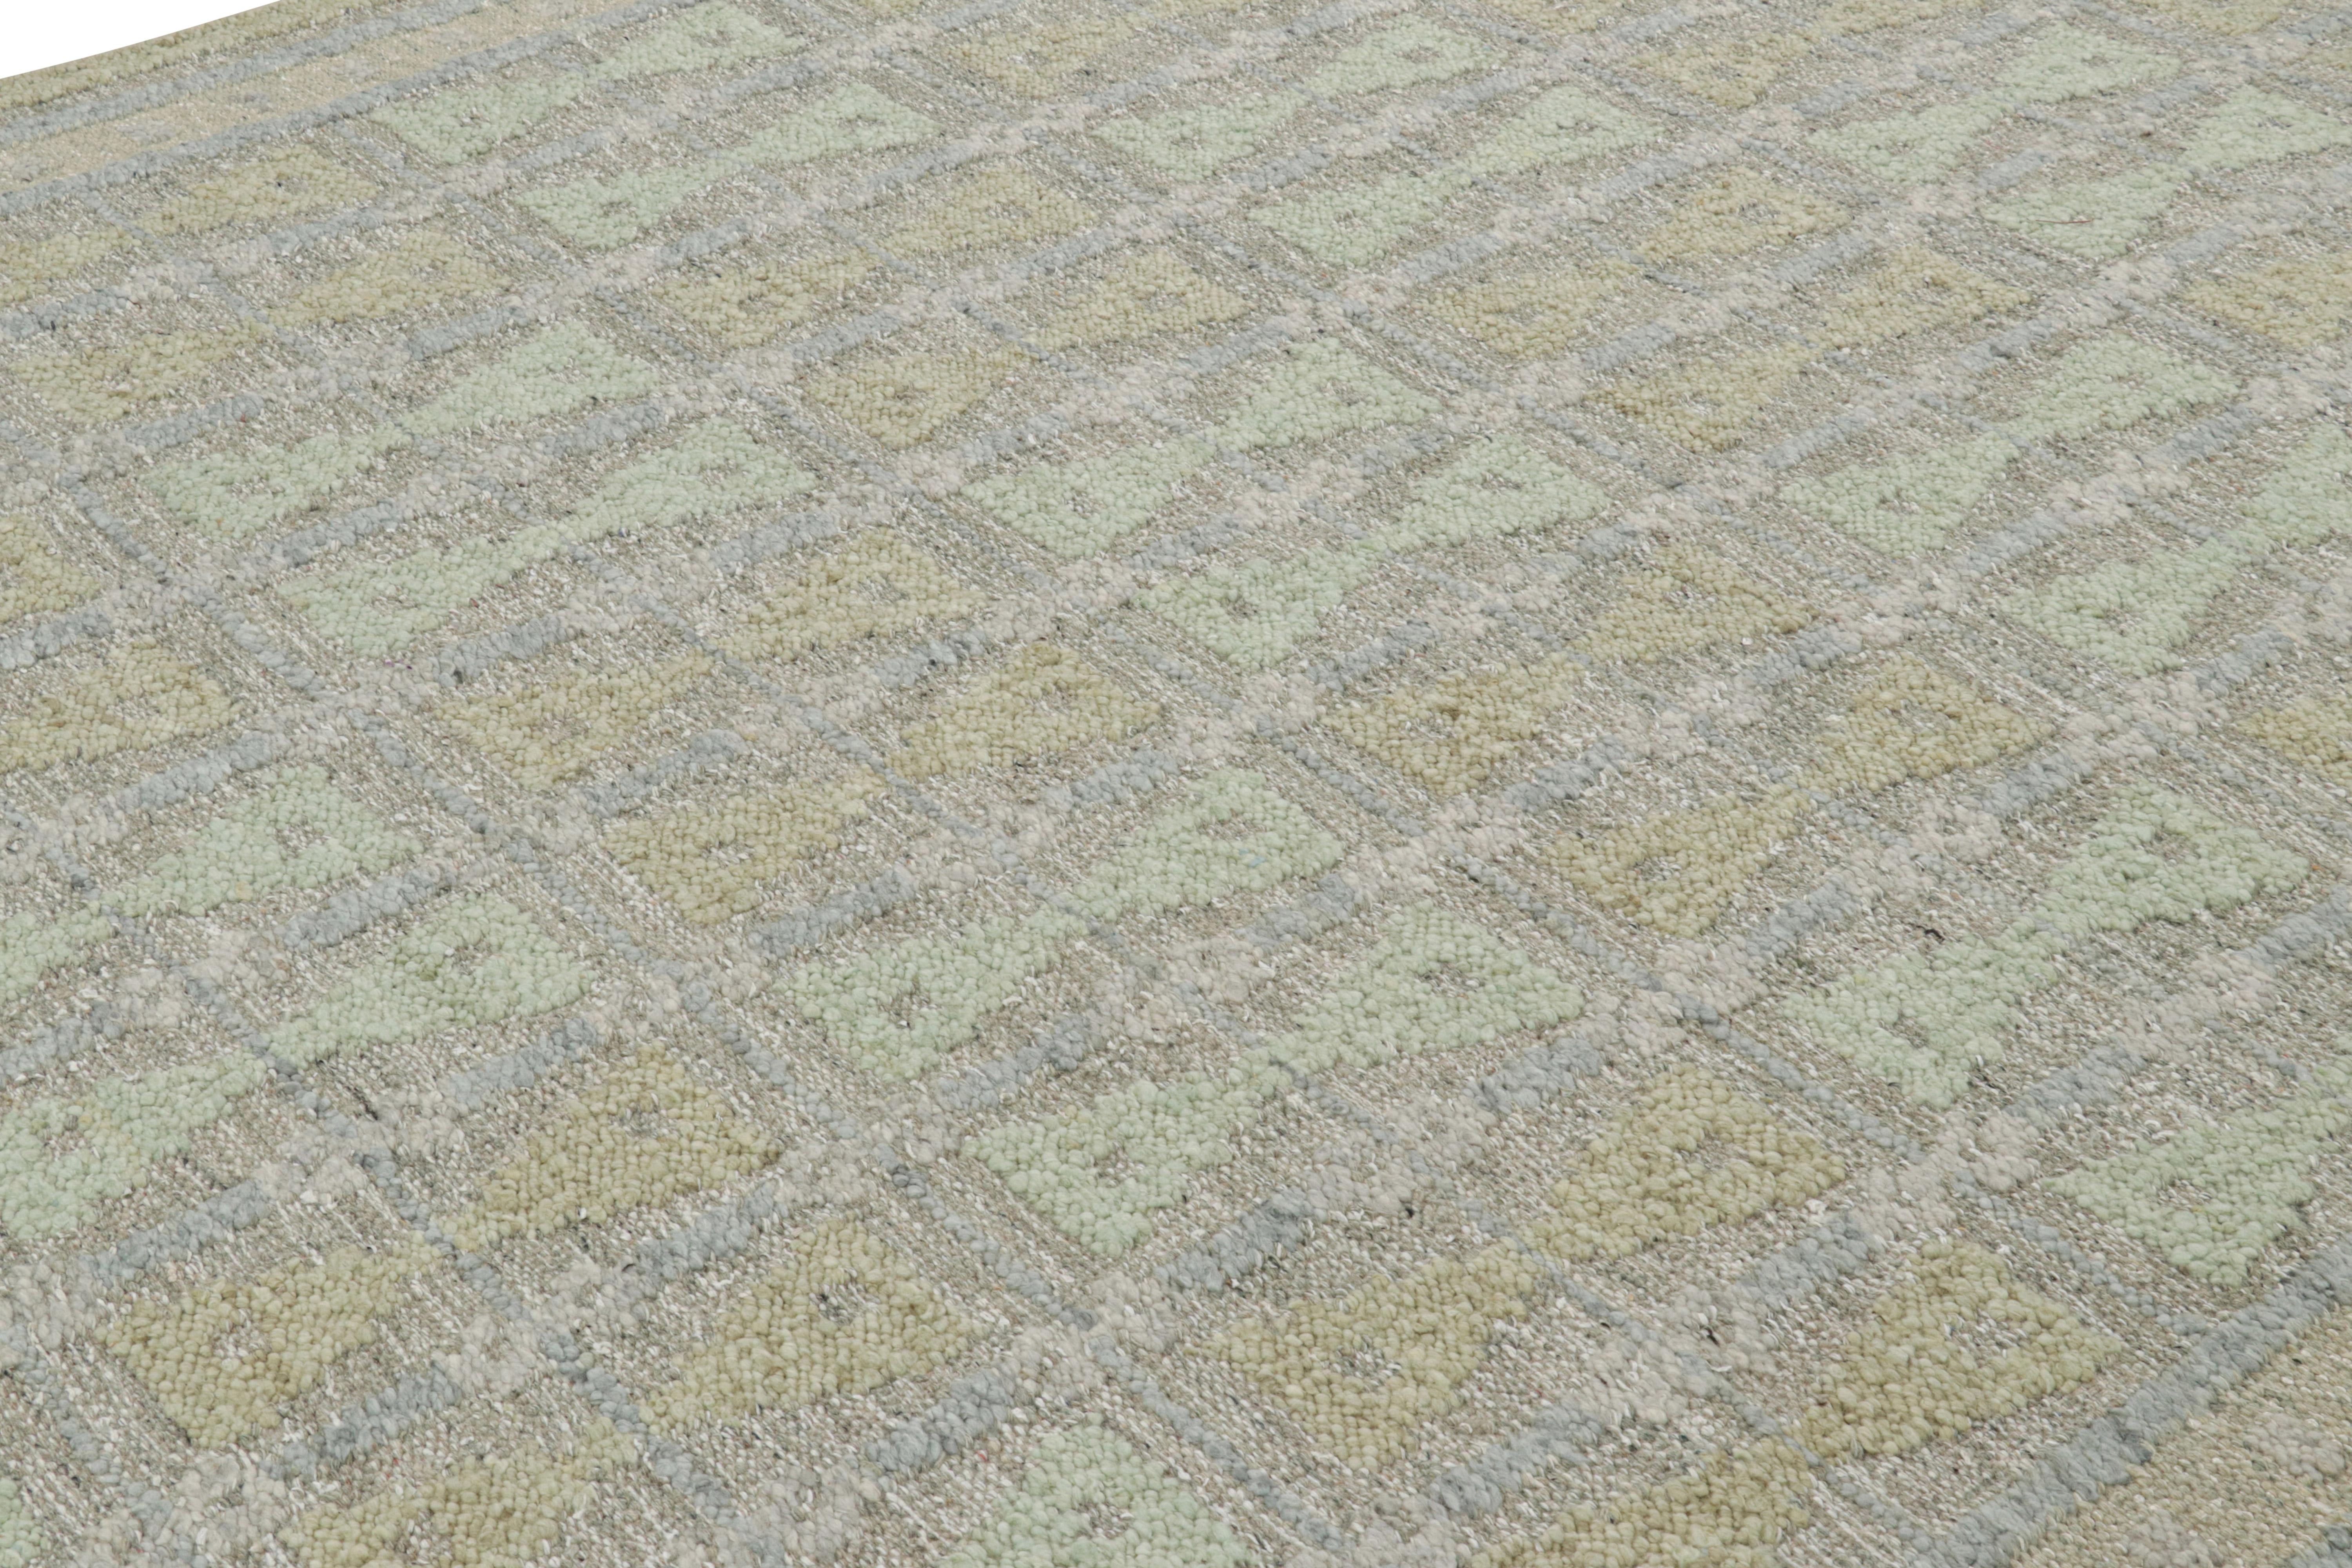 Handwoven in wool, this smart 9x12 Swedish style flat weave is Rug & Kilim’s “Nu” texture in their Scandinavian rug collection. 

On the design: 

Our “Nu” flat weave enjoys a boucle-like texture of blended yarns, and a look both impressionistic and